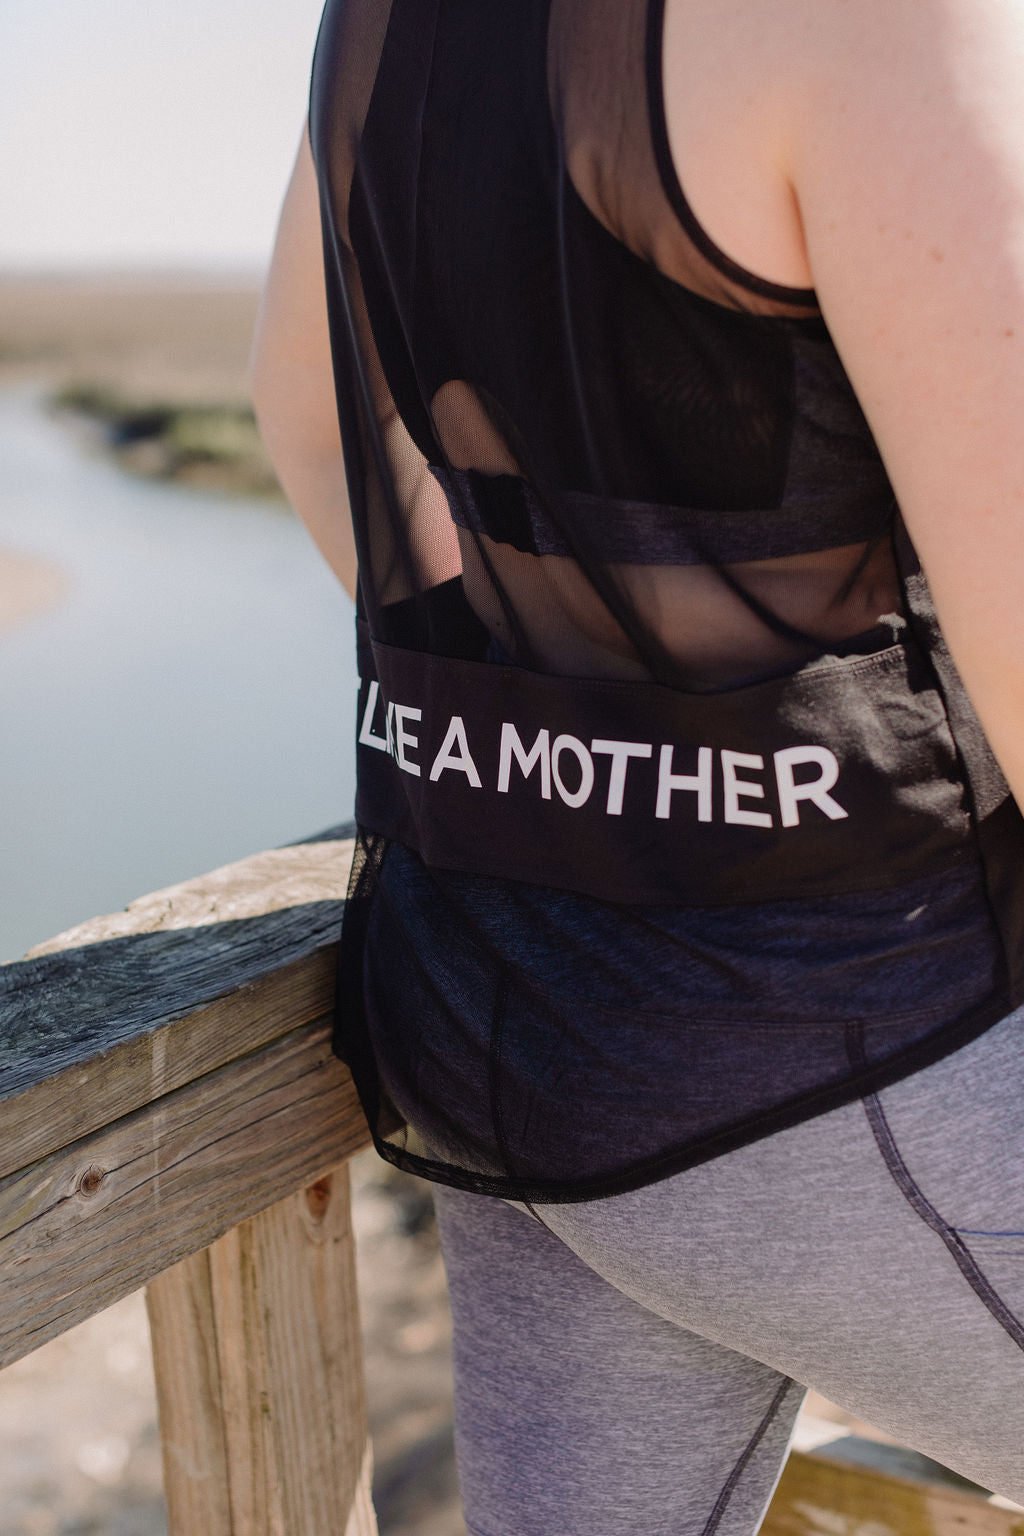 Black mesh back "Built Like A Mother" Maternity activewear and postpartum tank